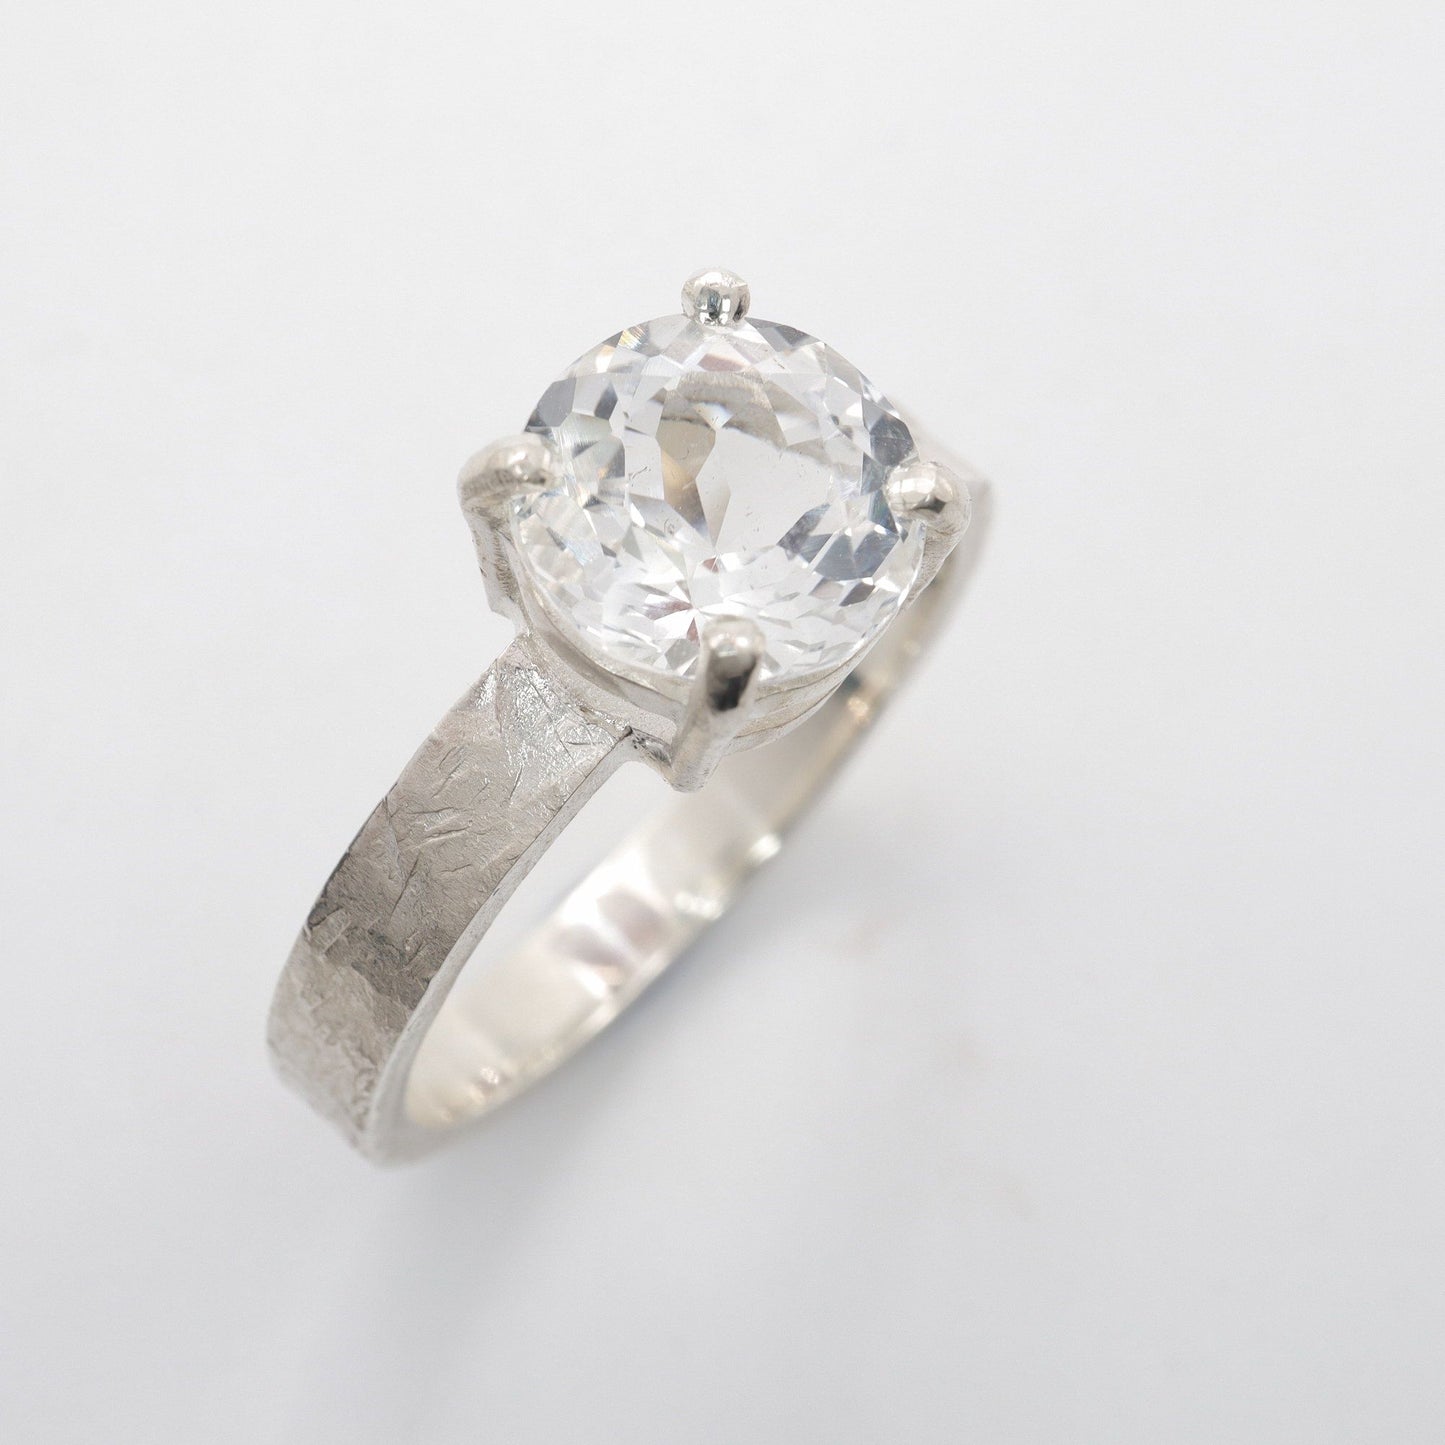 White Topaz large solitaire ring, Windermere design